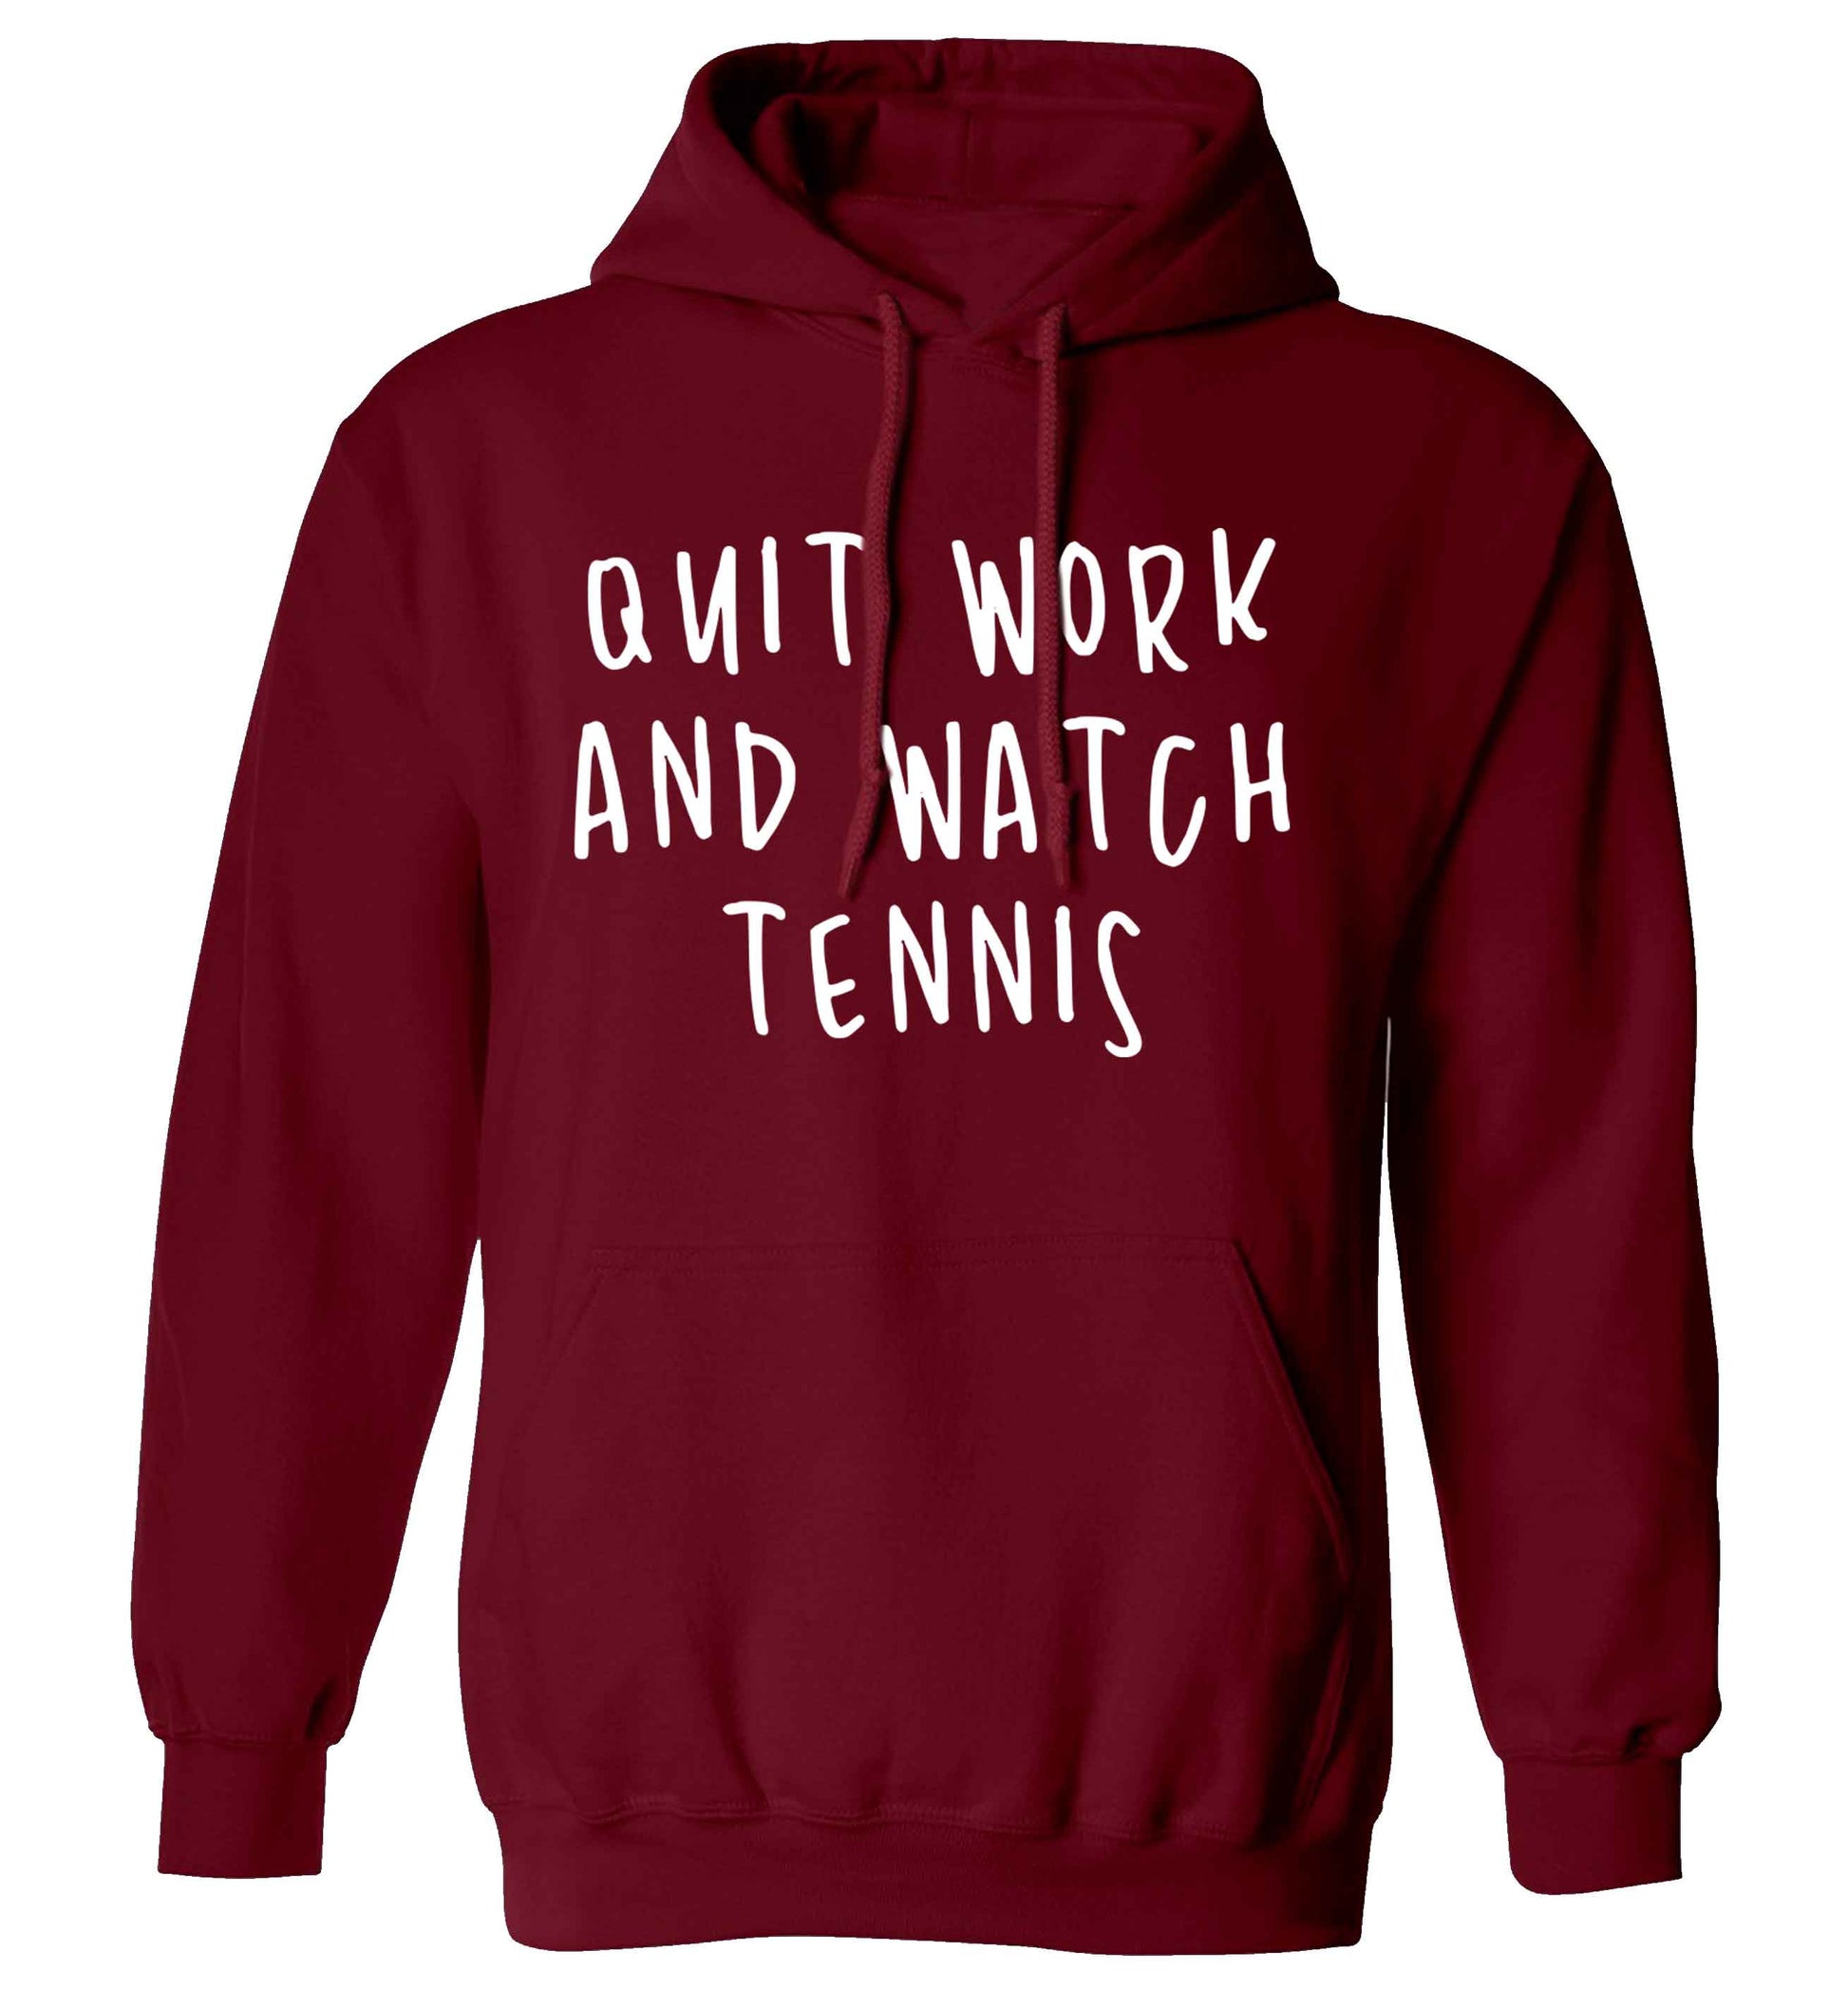 Quit work and watch tennis adults unisex maroon hoodie 2XL